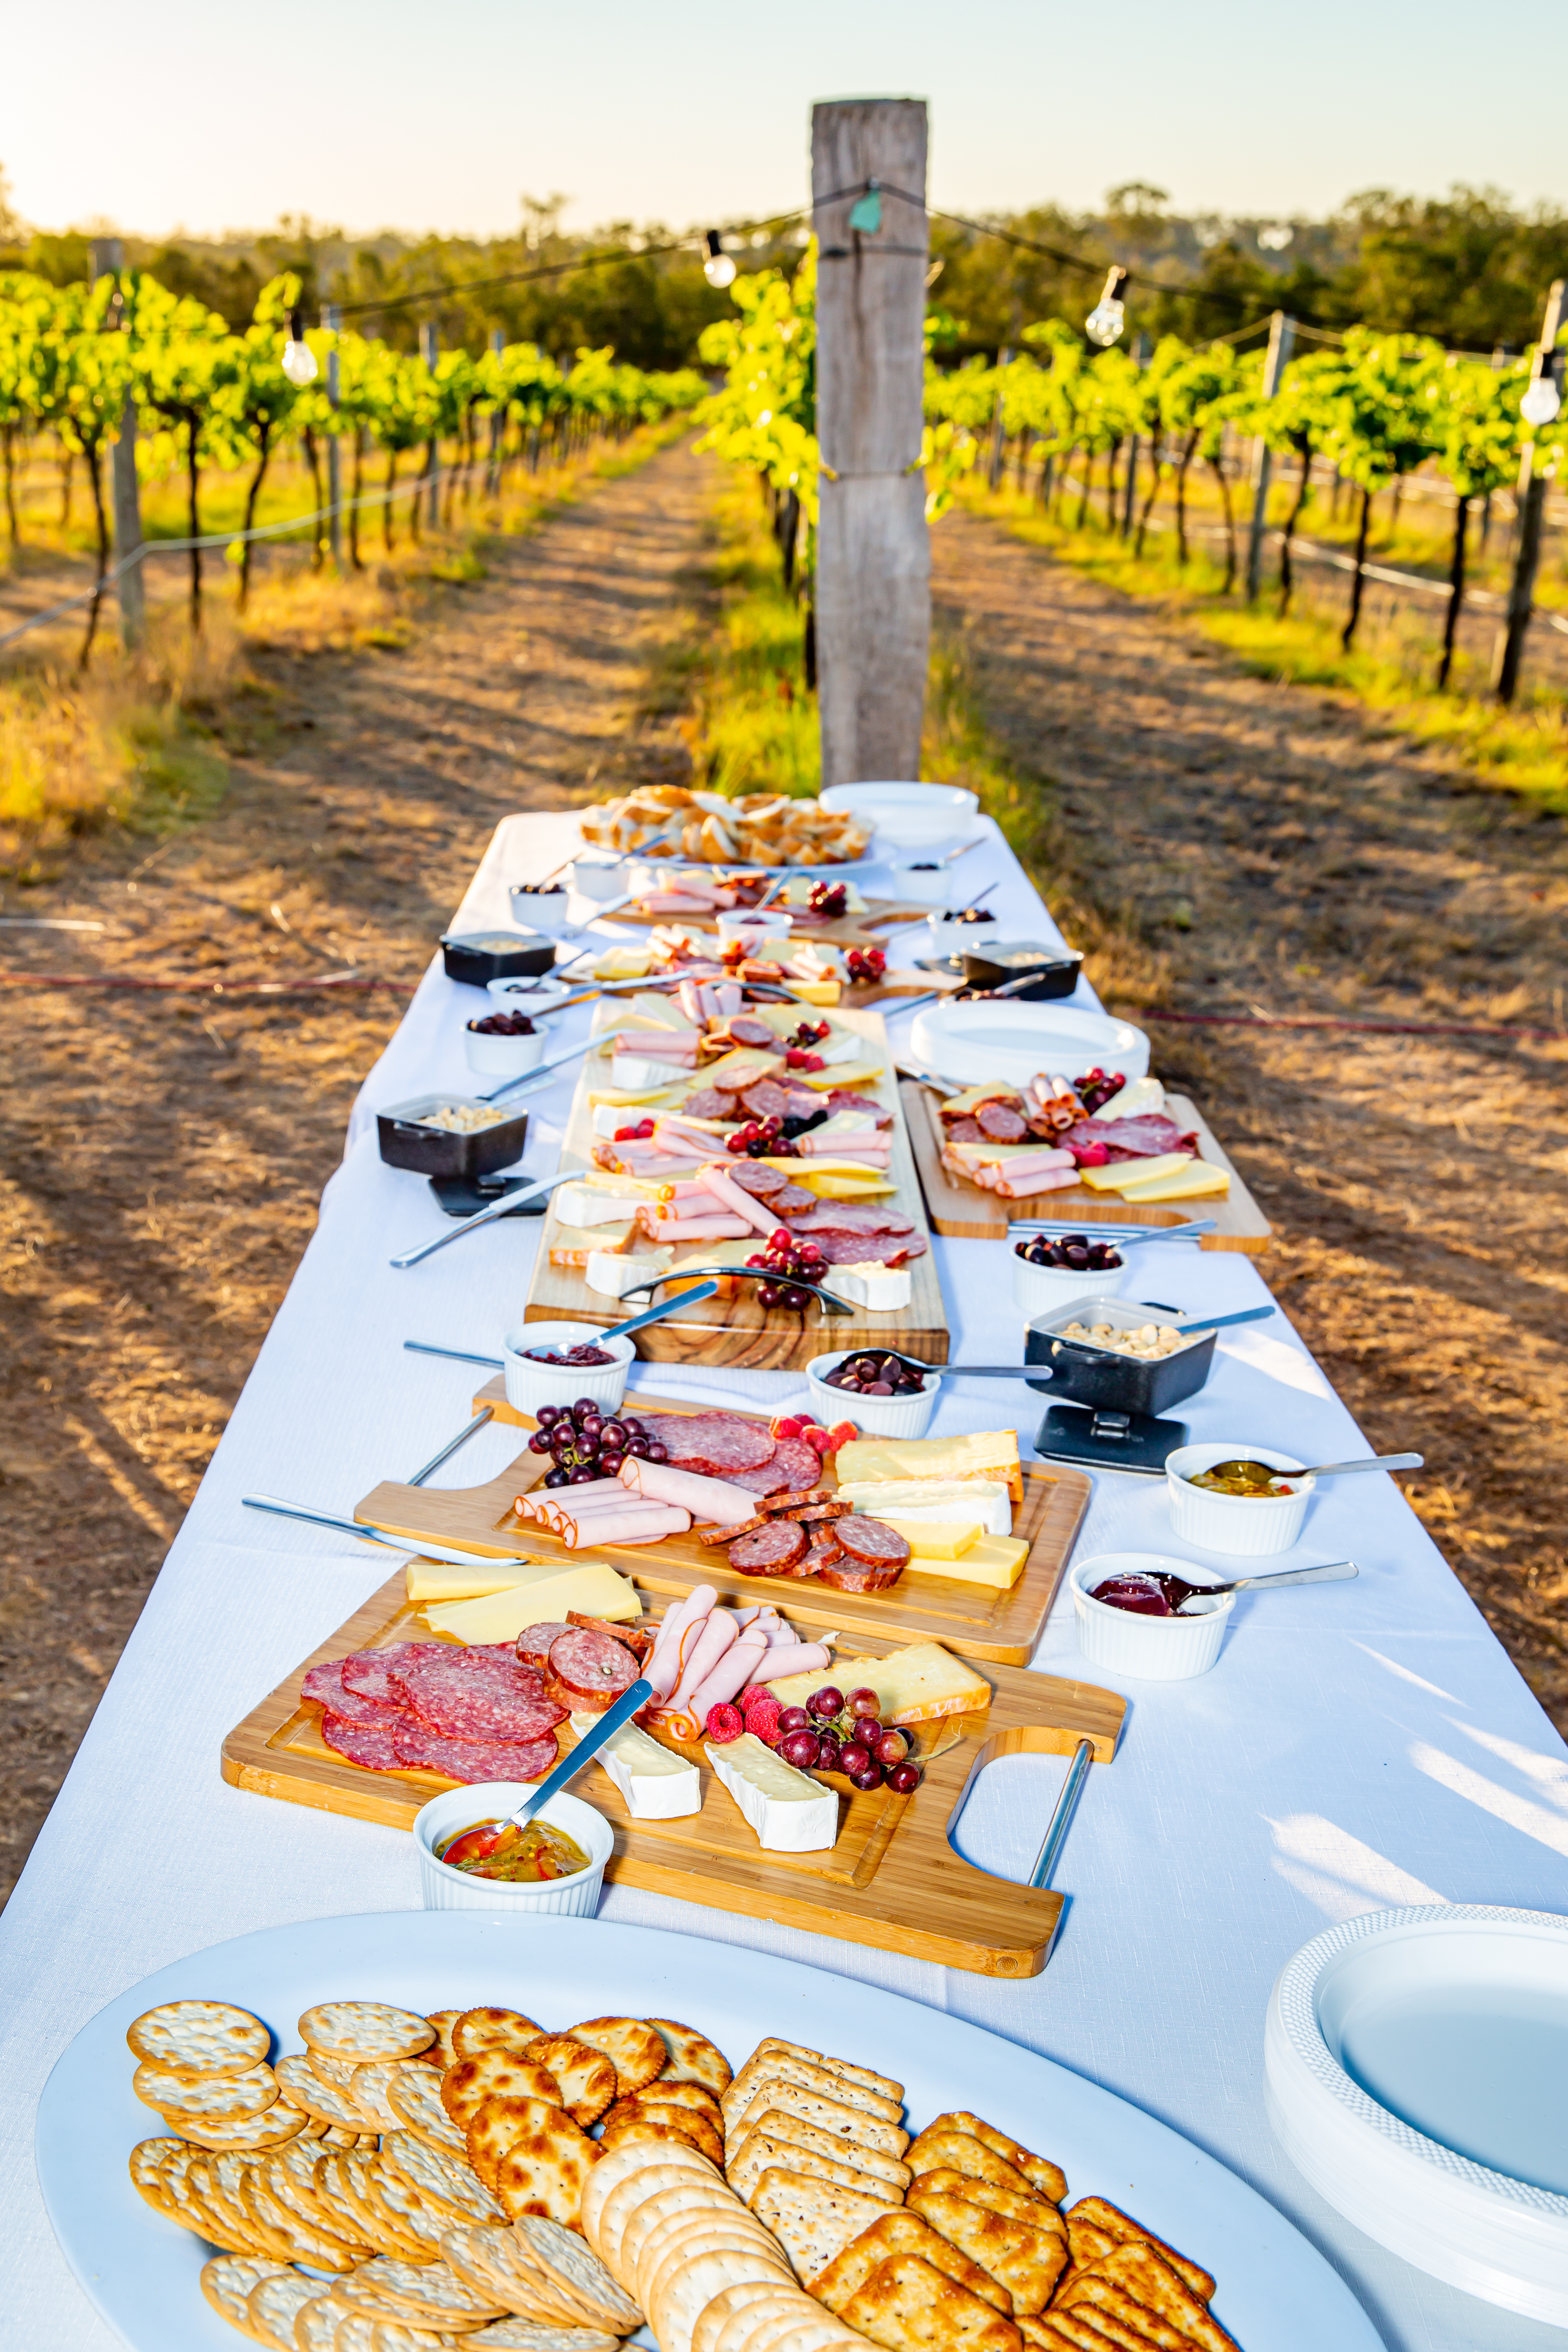 Table with food at the vineyard 